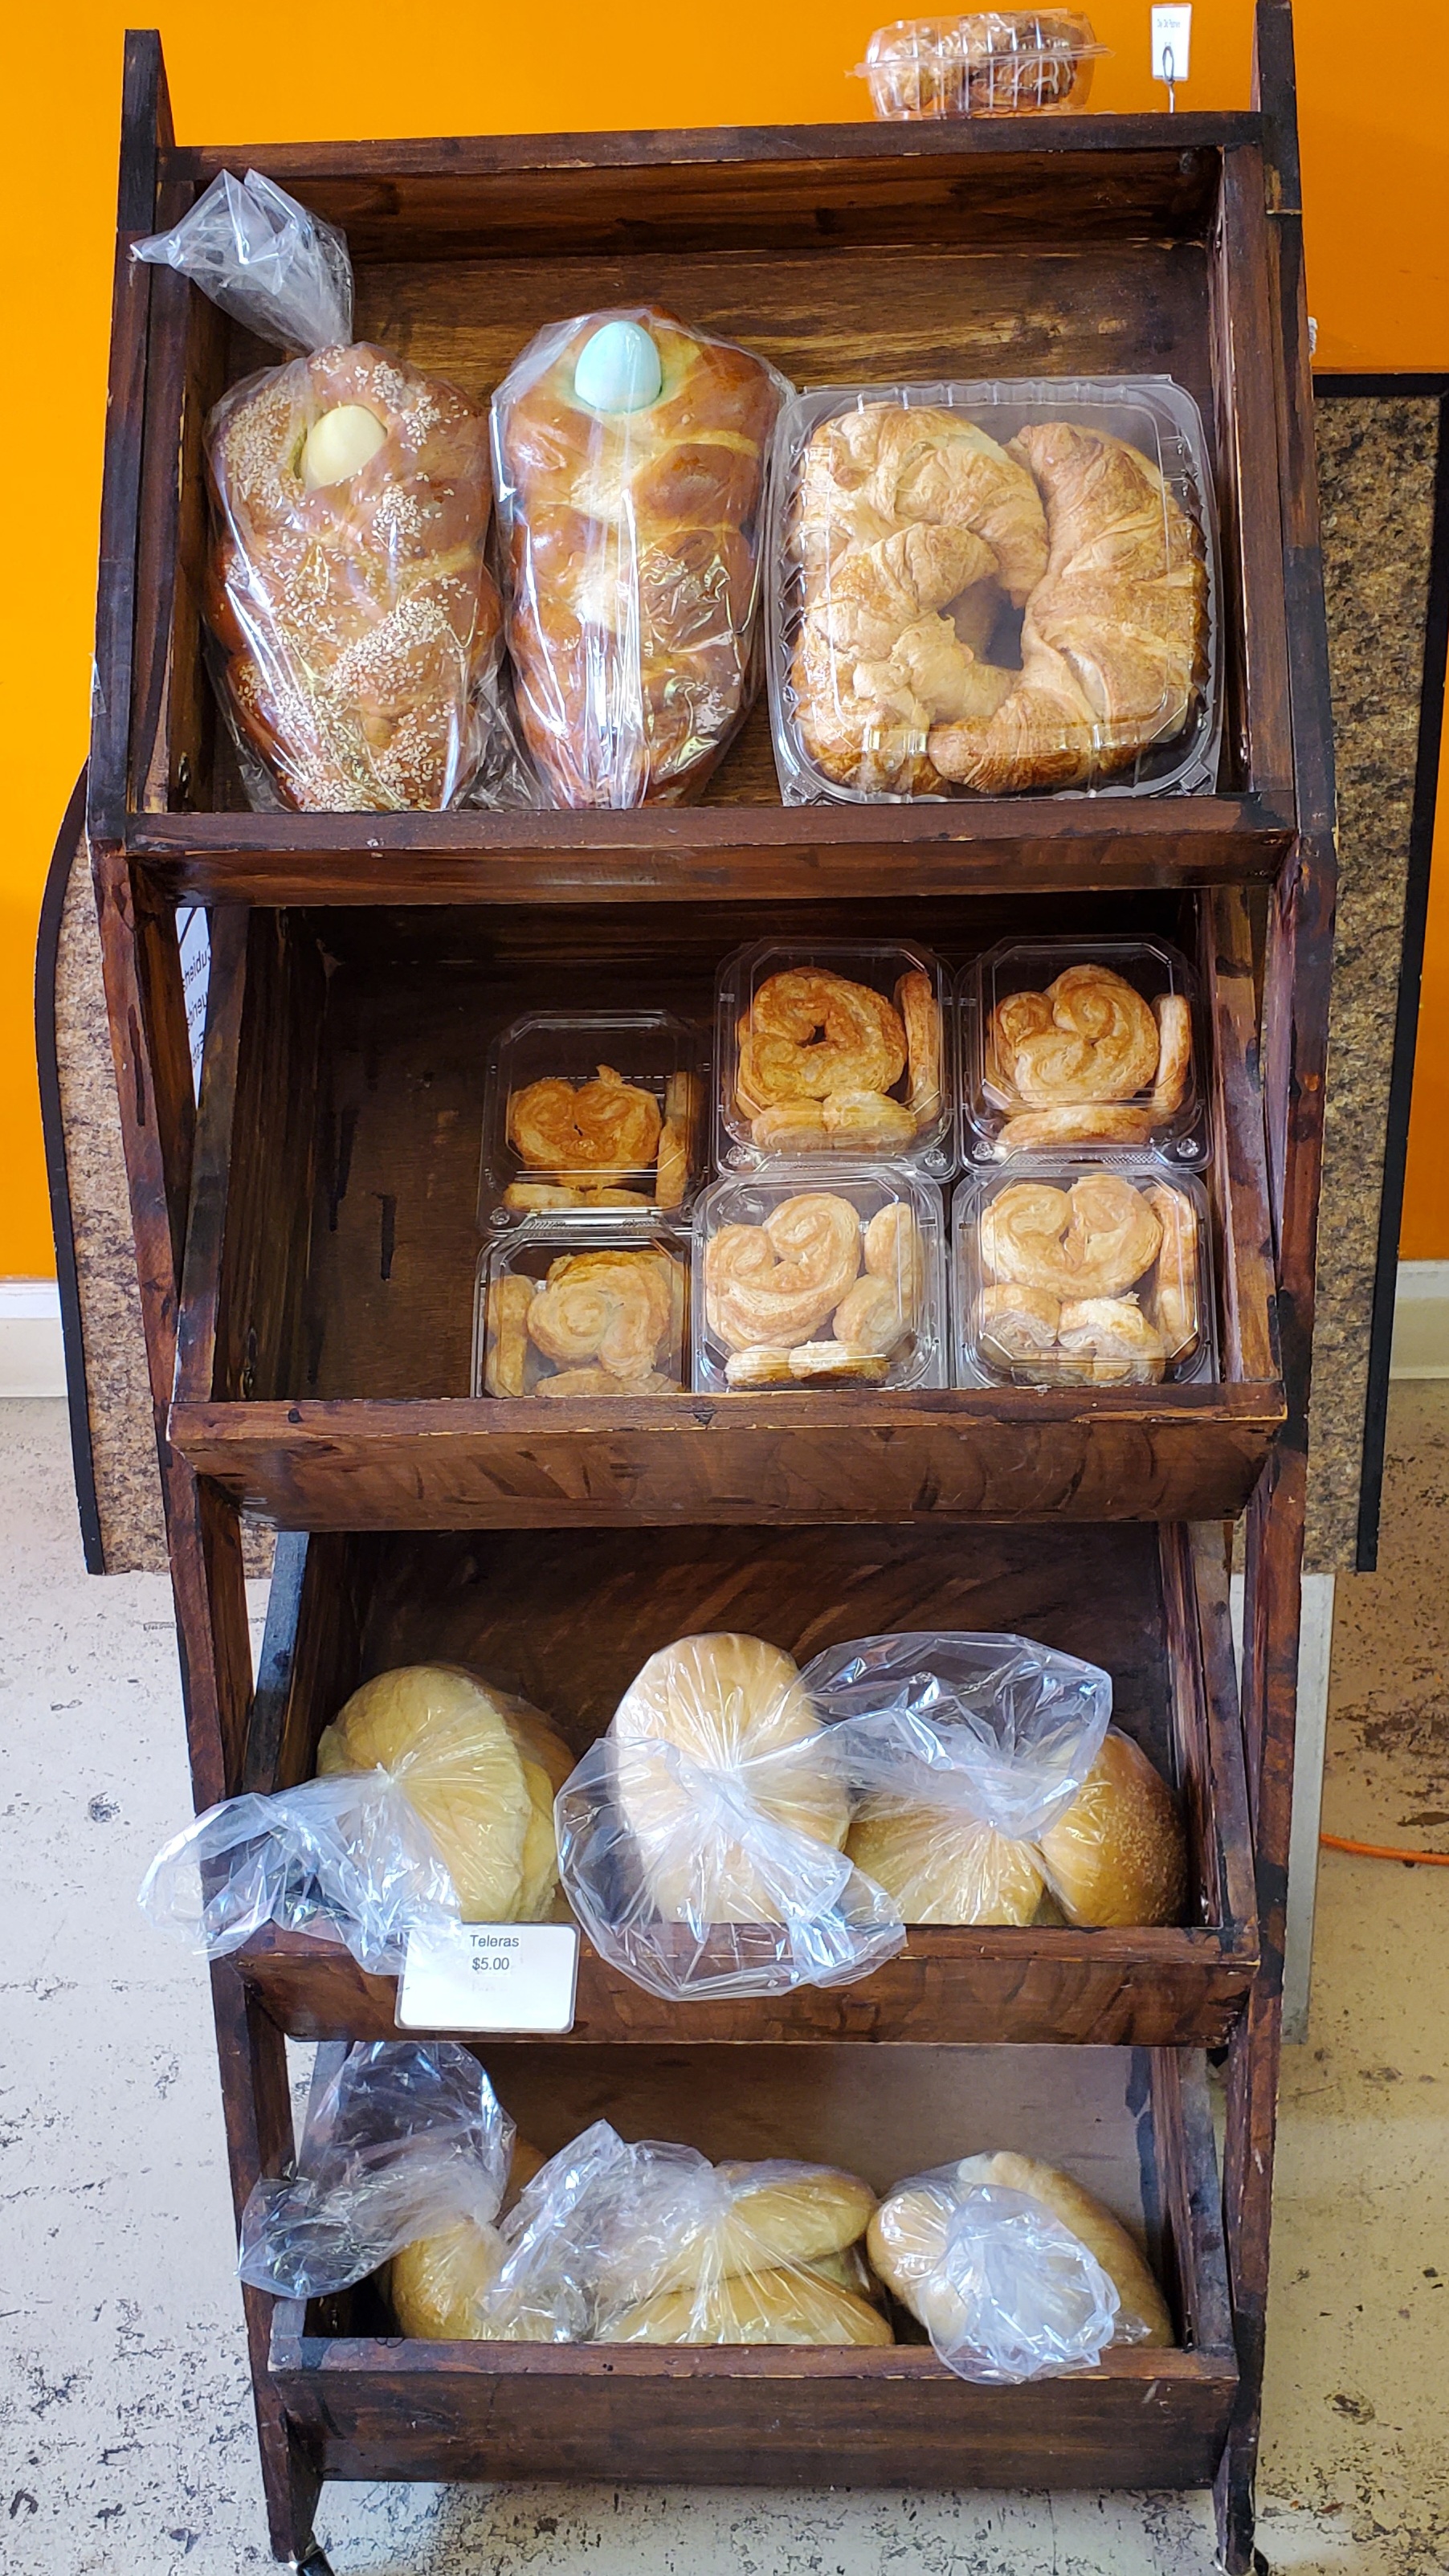 In a wooden case, there are breads wrapped in plastic bags for sale inside Rick's Bakery. Photo by Carl Busch.